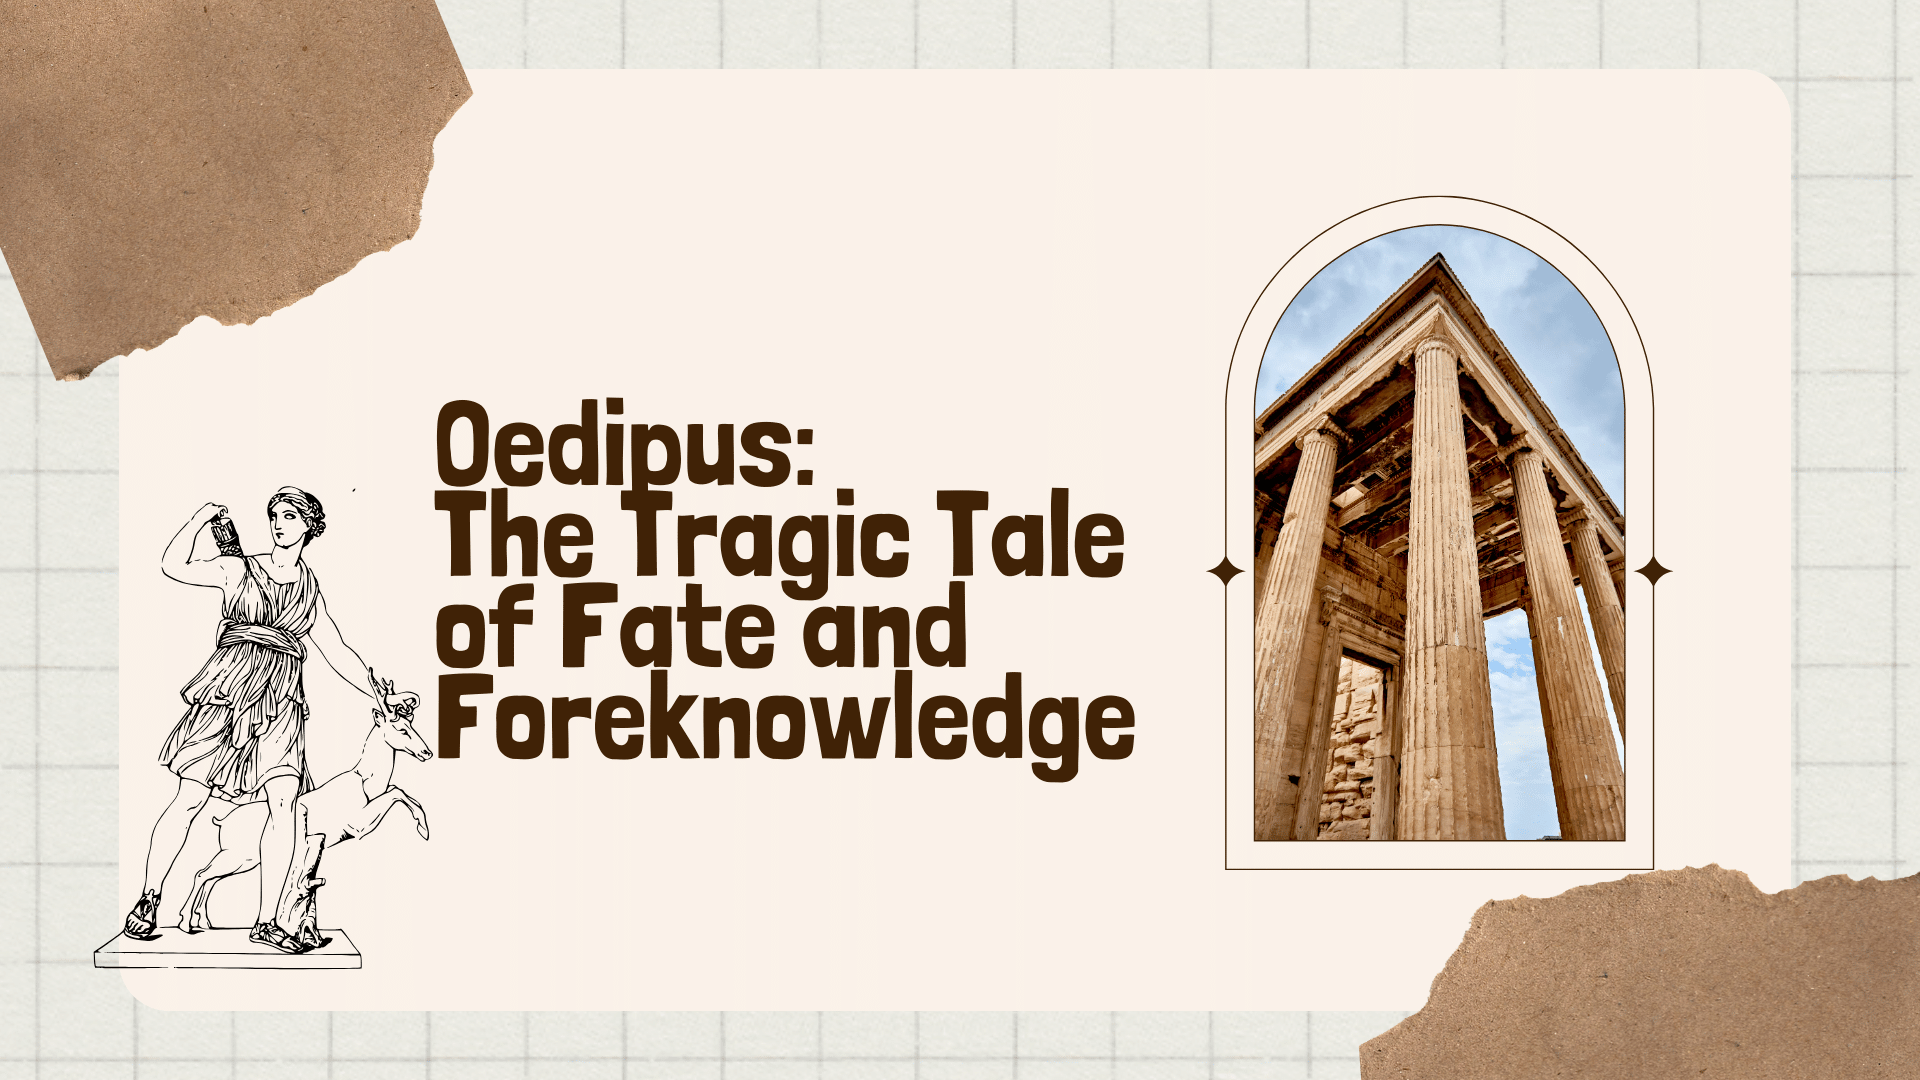 Oedipus: The Tragic Tale of Fate and Foreknowledge